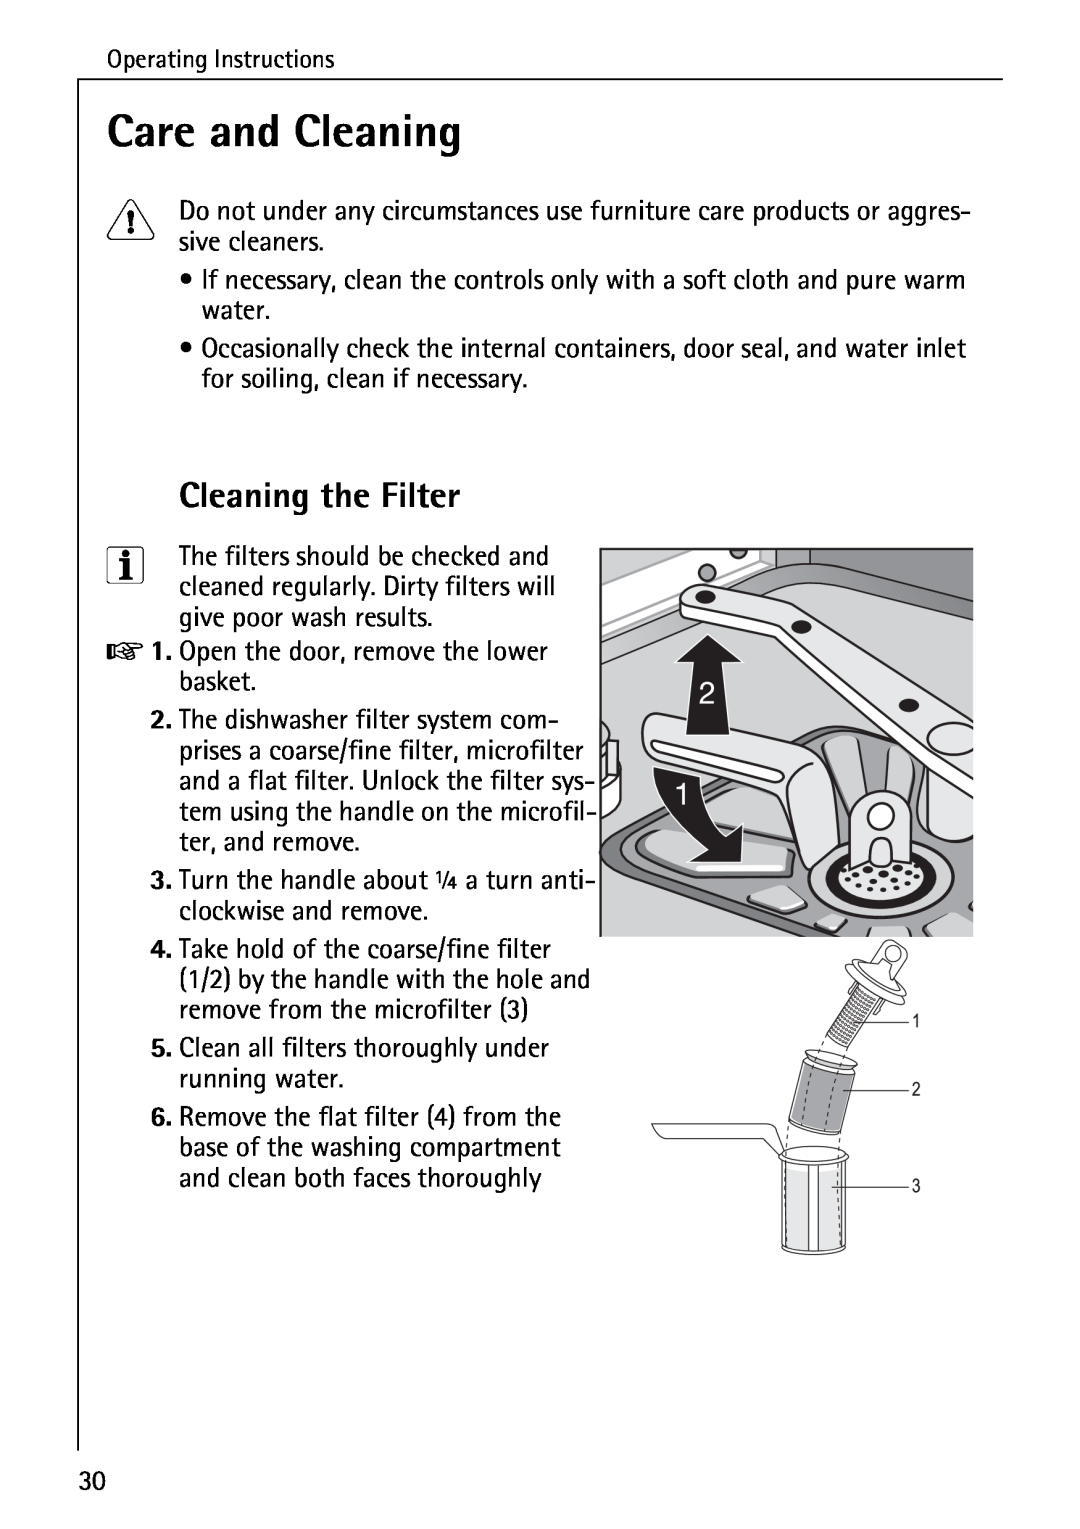 AEG 40740 manual Care and Cleaning, Cleaning the Filter 